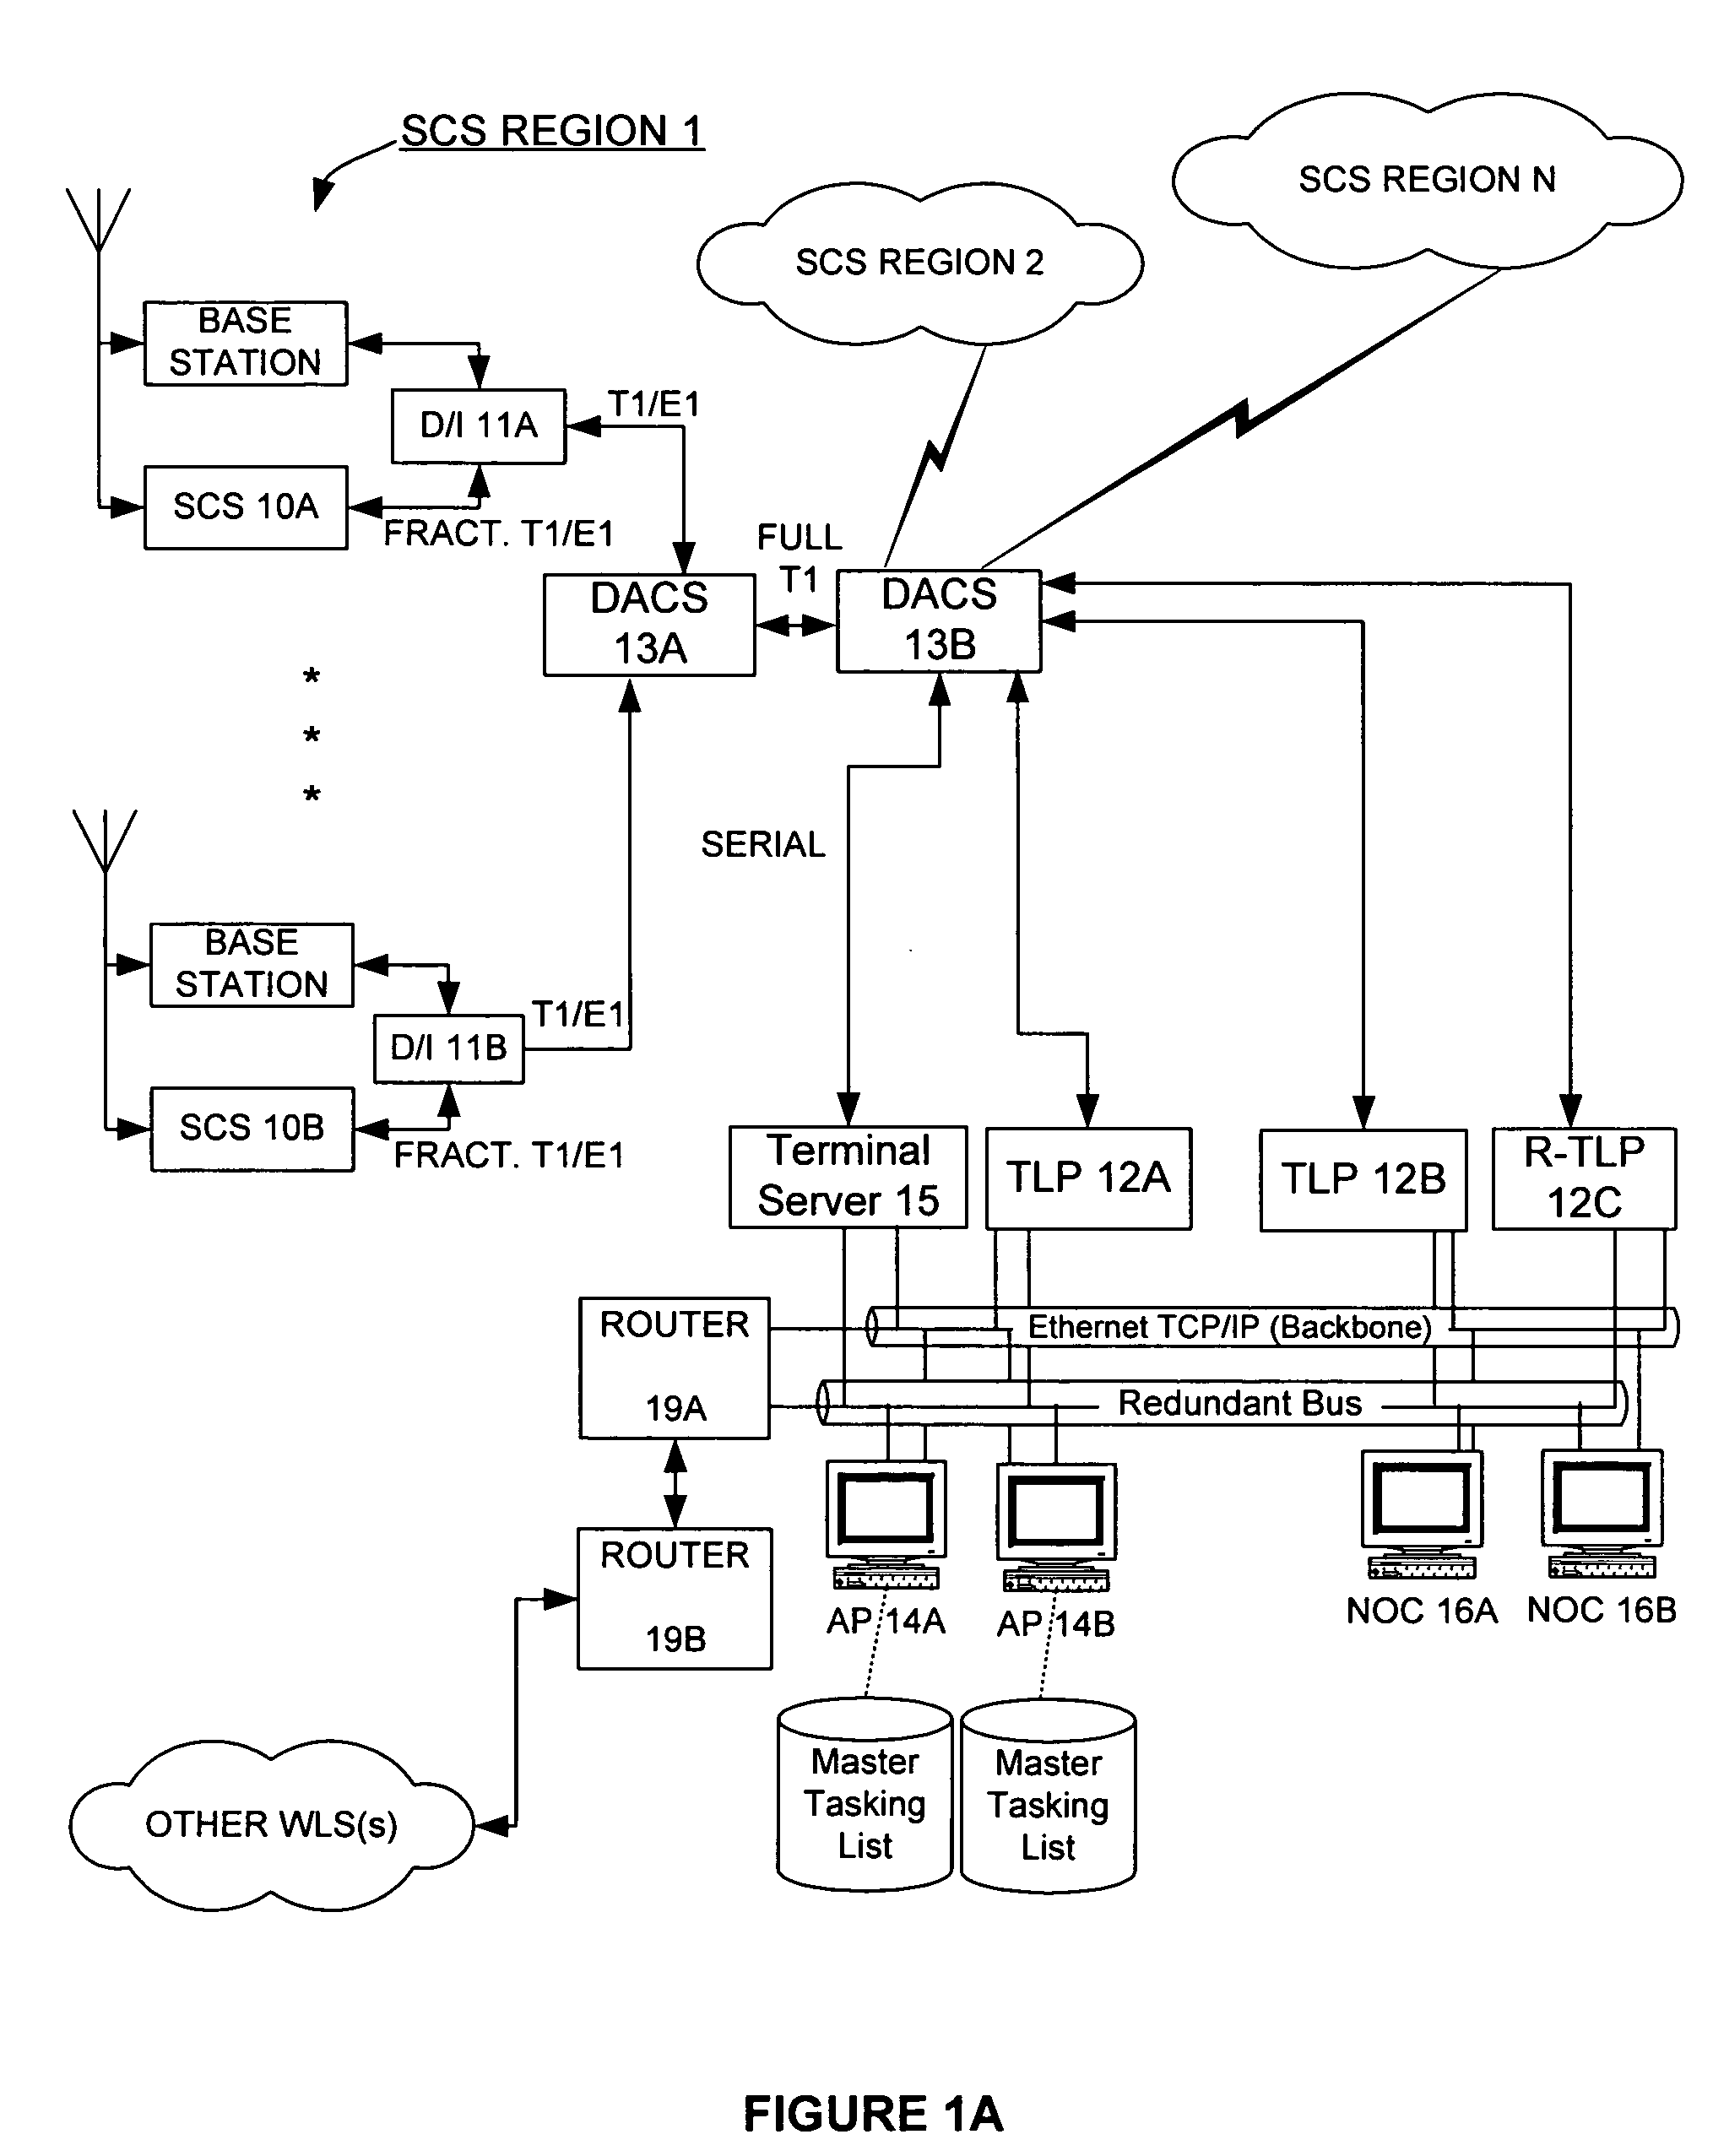 Monitoring of call information in a wireless location system